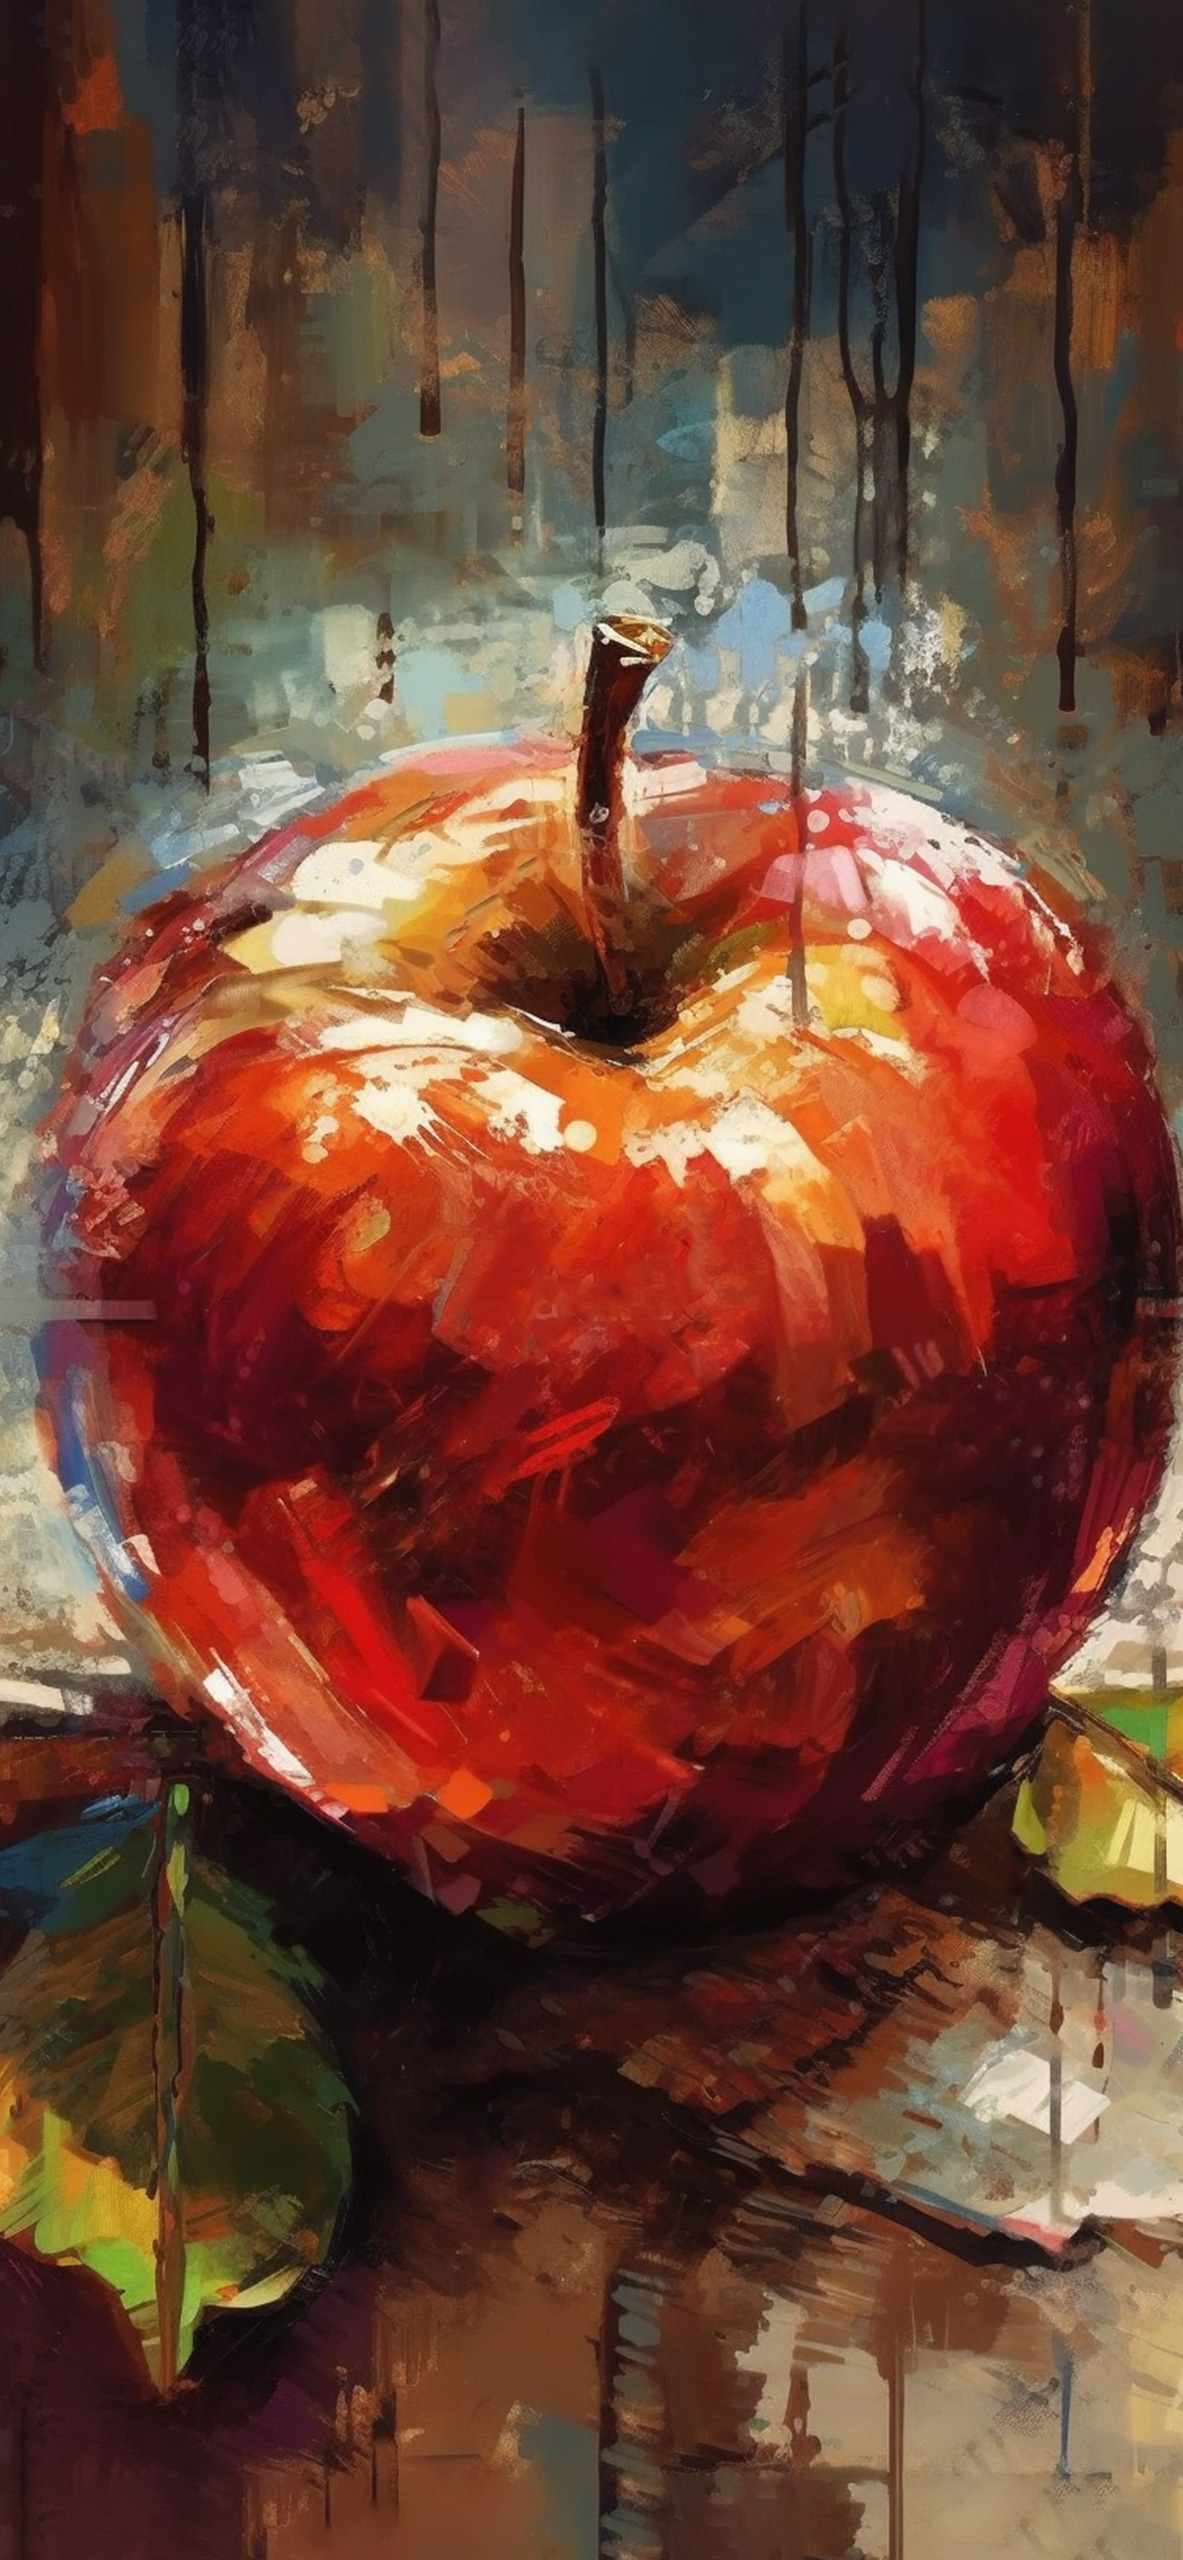 red apple painting wallpaper